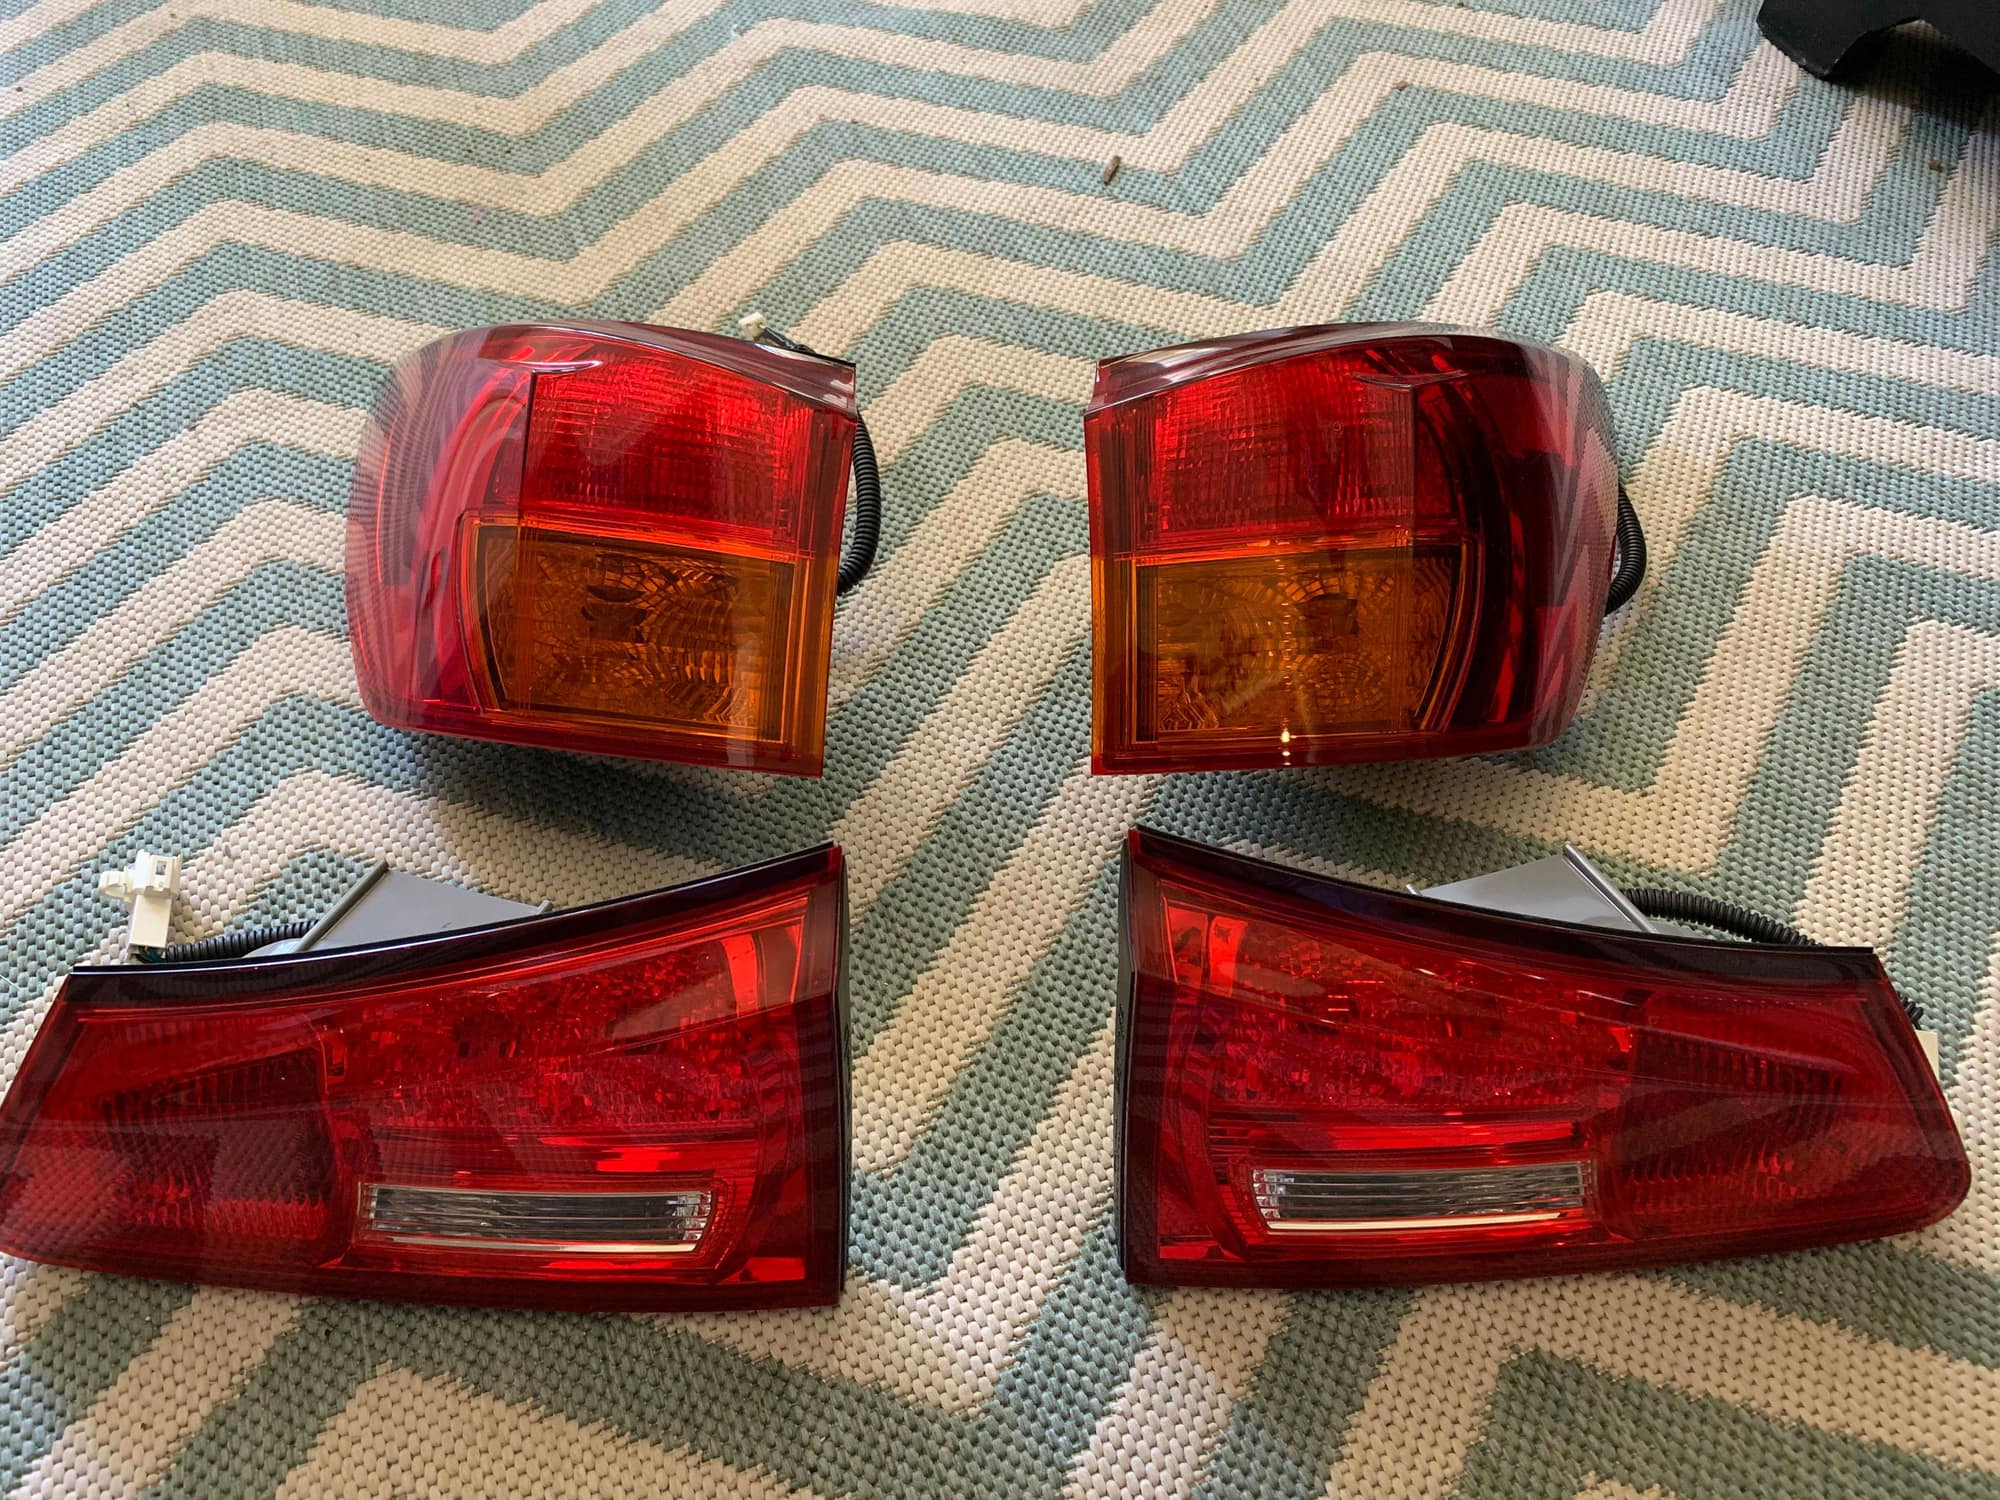 Lights - FS: 06-08 ISx50 Tail Lights - Complete Set - Used - 2006 to 2013 Lexus IS250 - 2006 to 2013 Lexus IS350 - 2008 to 2014 Lexus IS F - Baton Rouge, LA 70817, United States